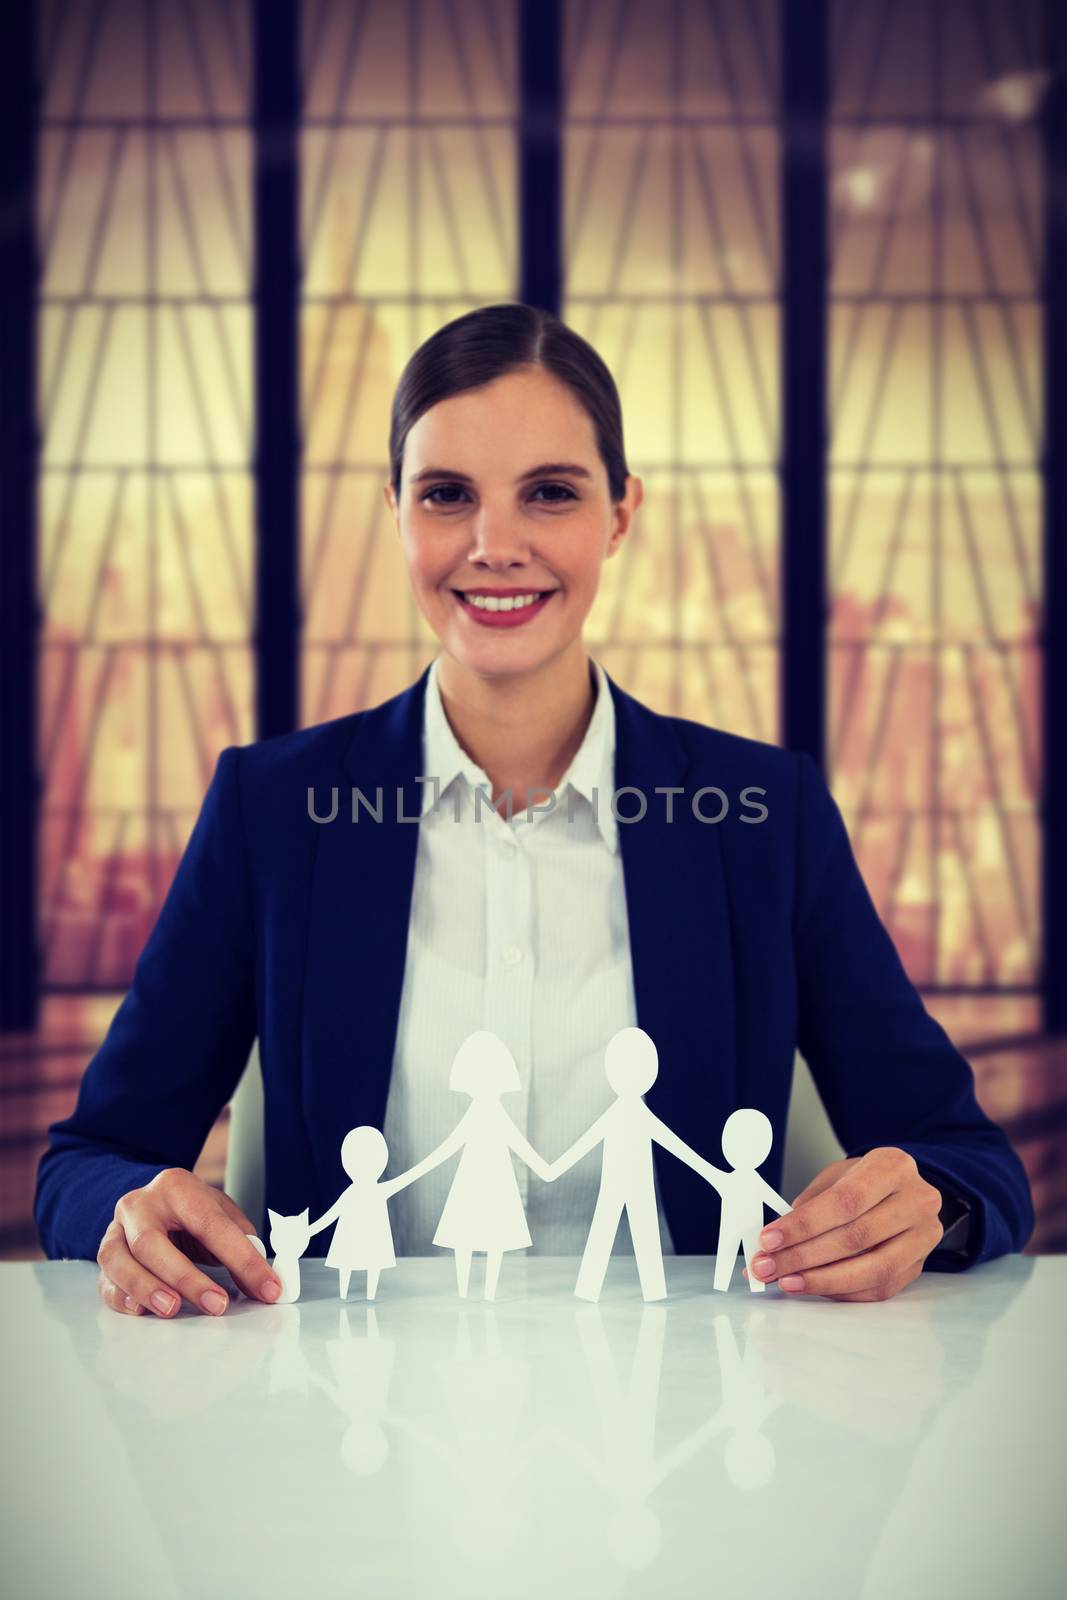 Composite image of family in white paper with a woman in the background by Wavebreakmedia